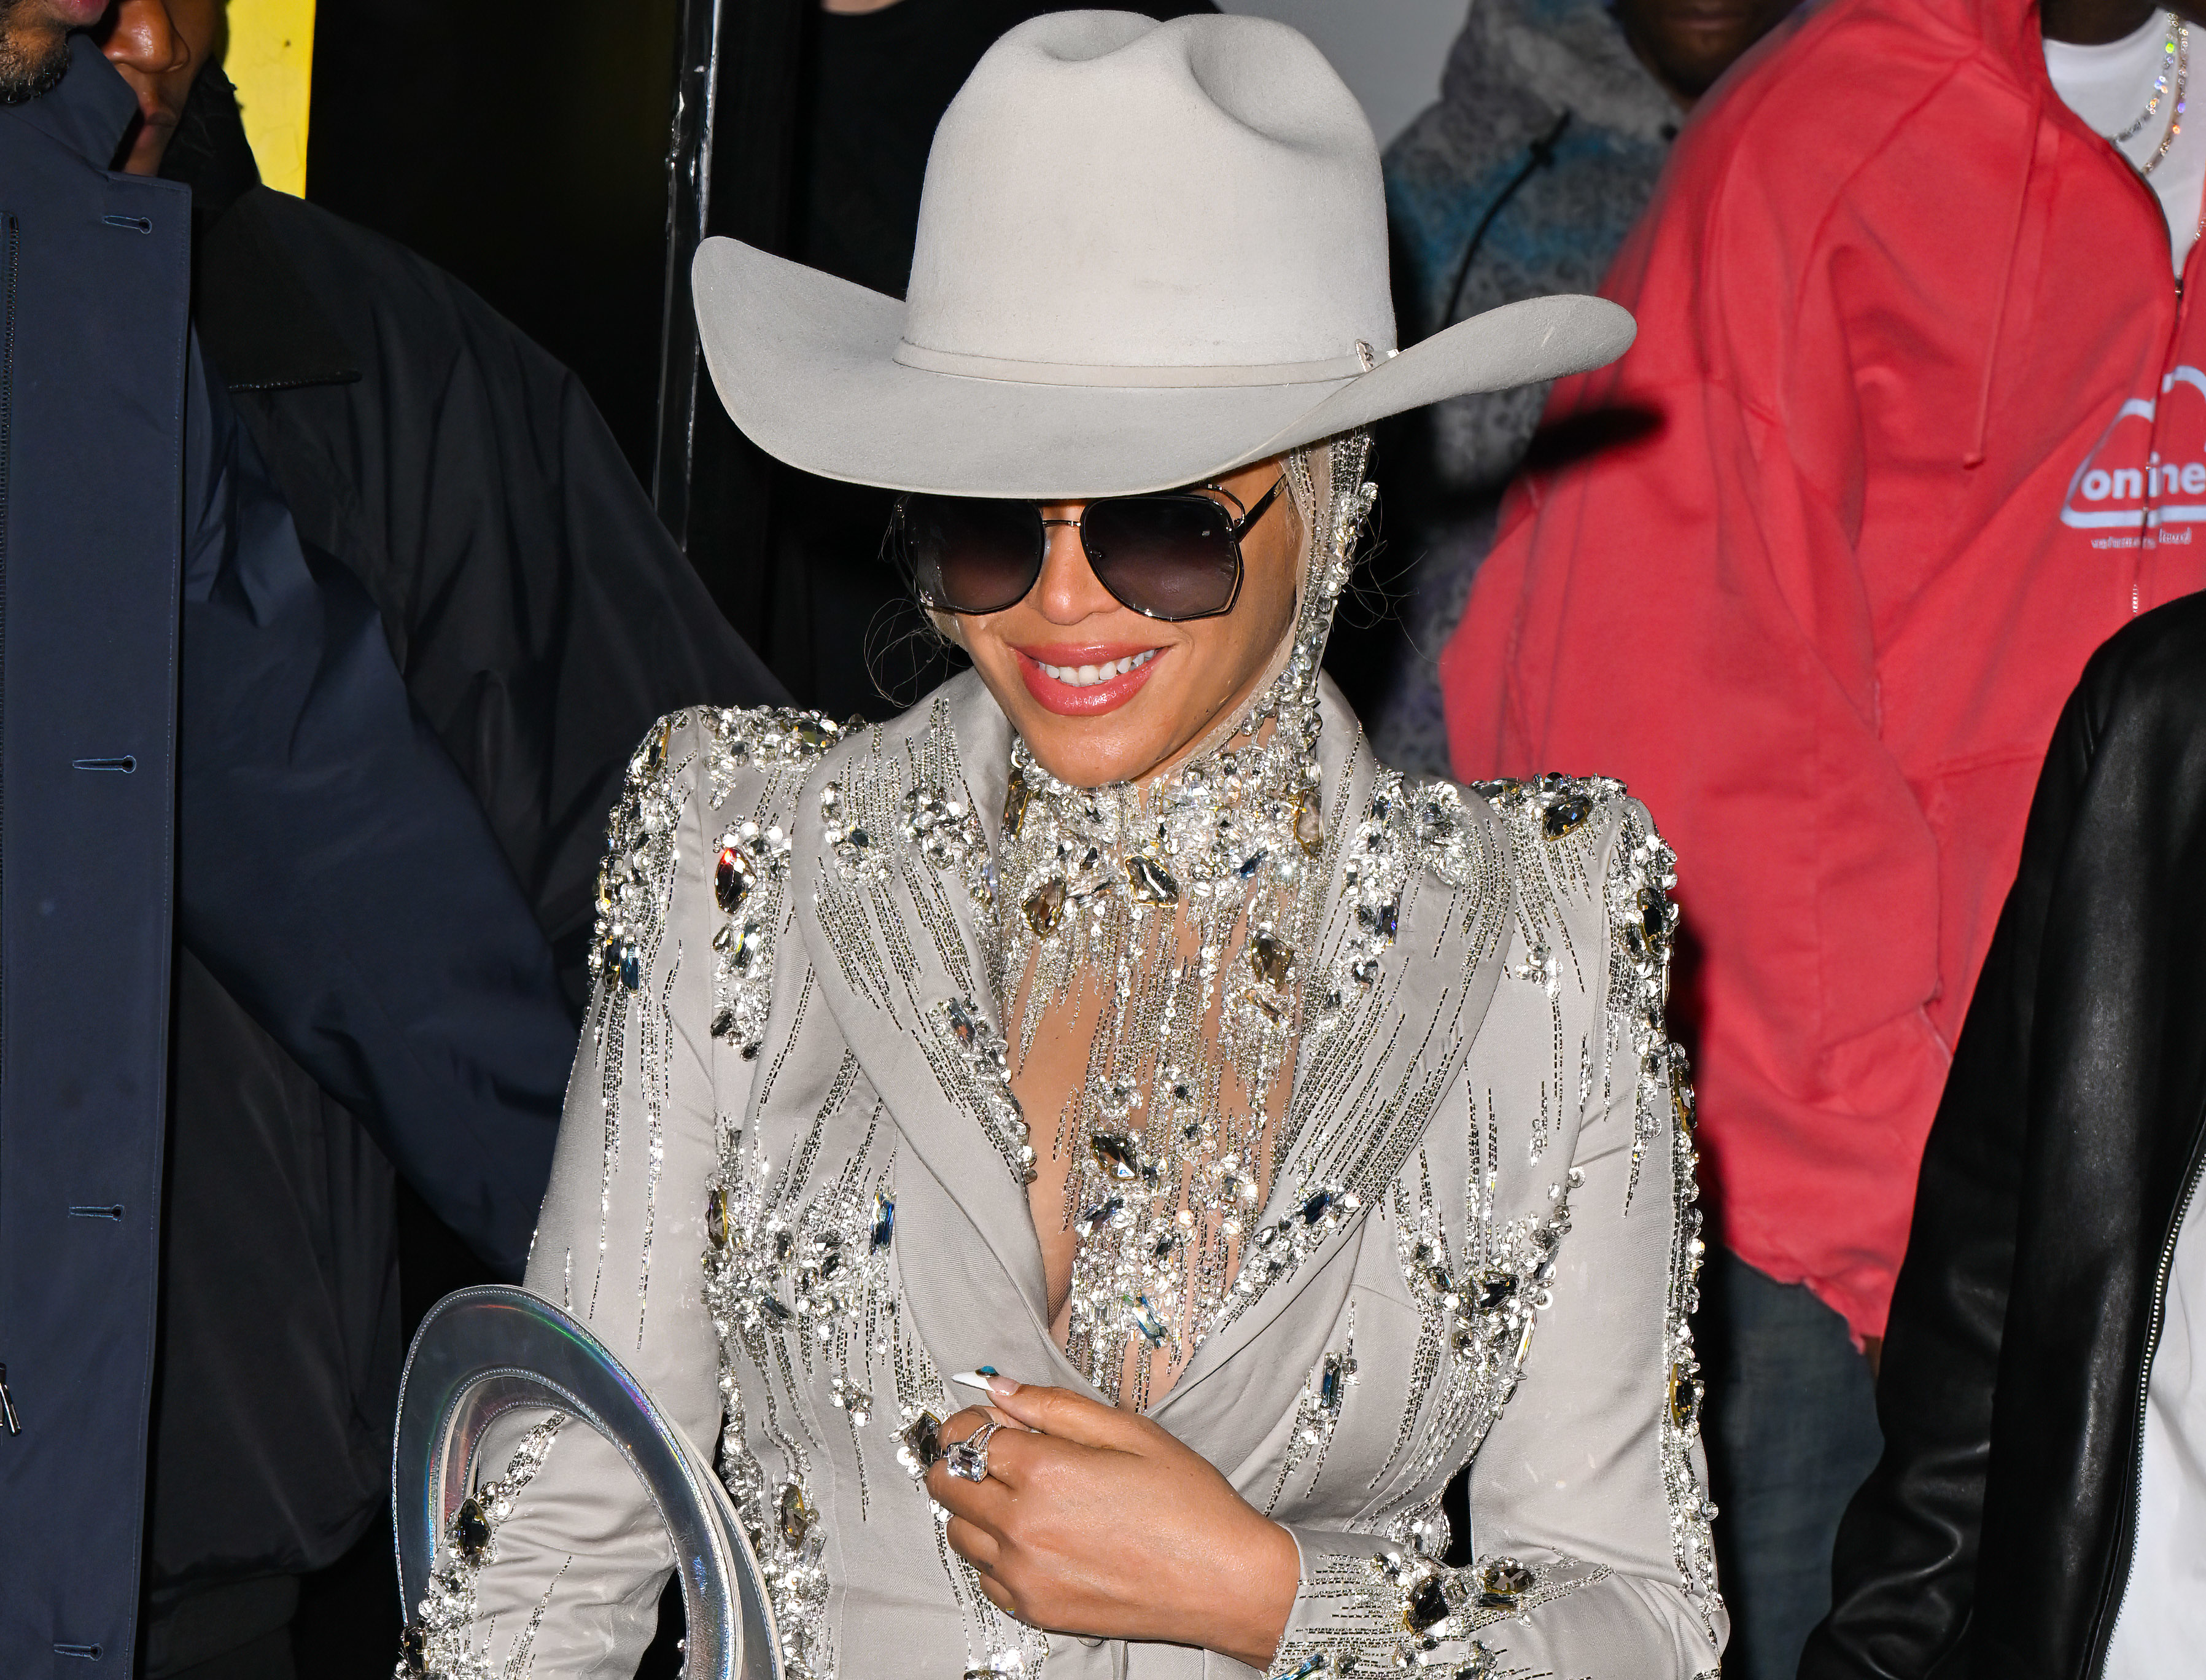 Closeup of Beyoncé smiling while wearing sunglasses and a cowboy hat